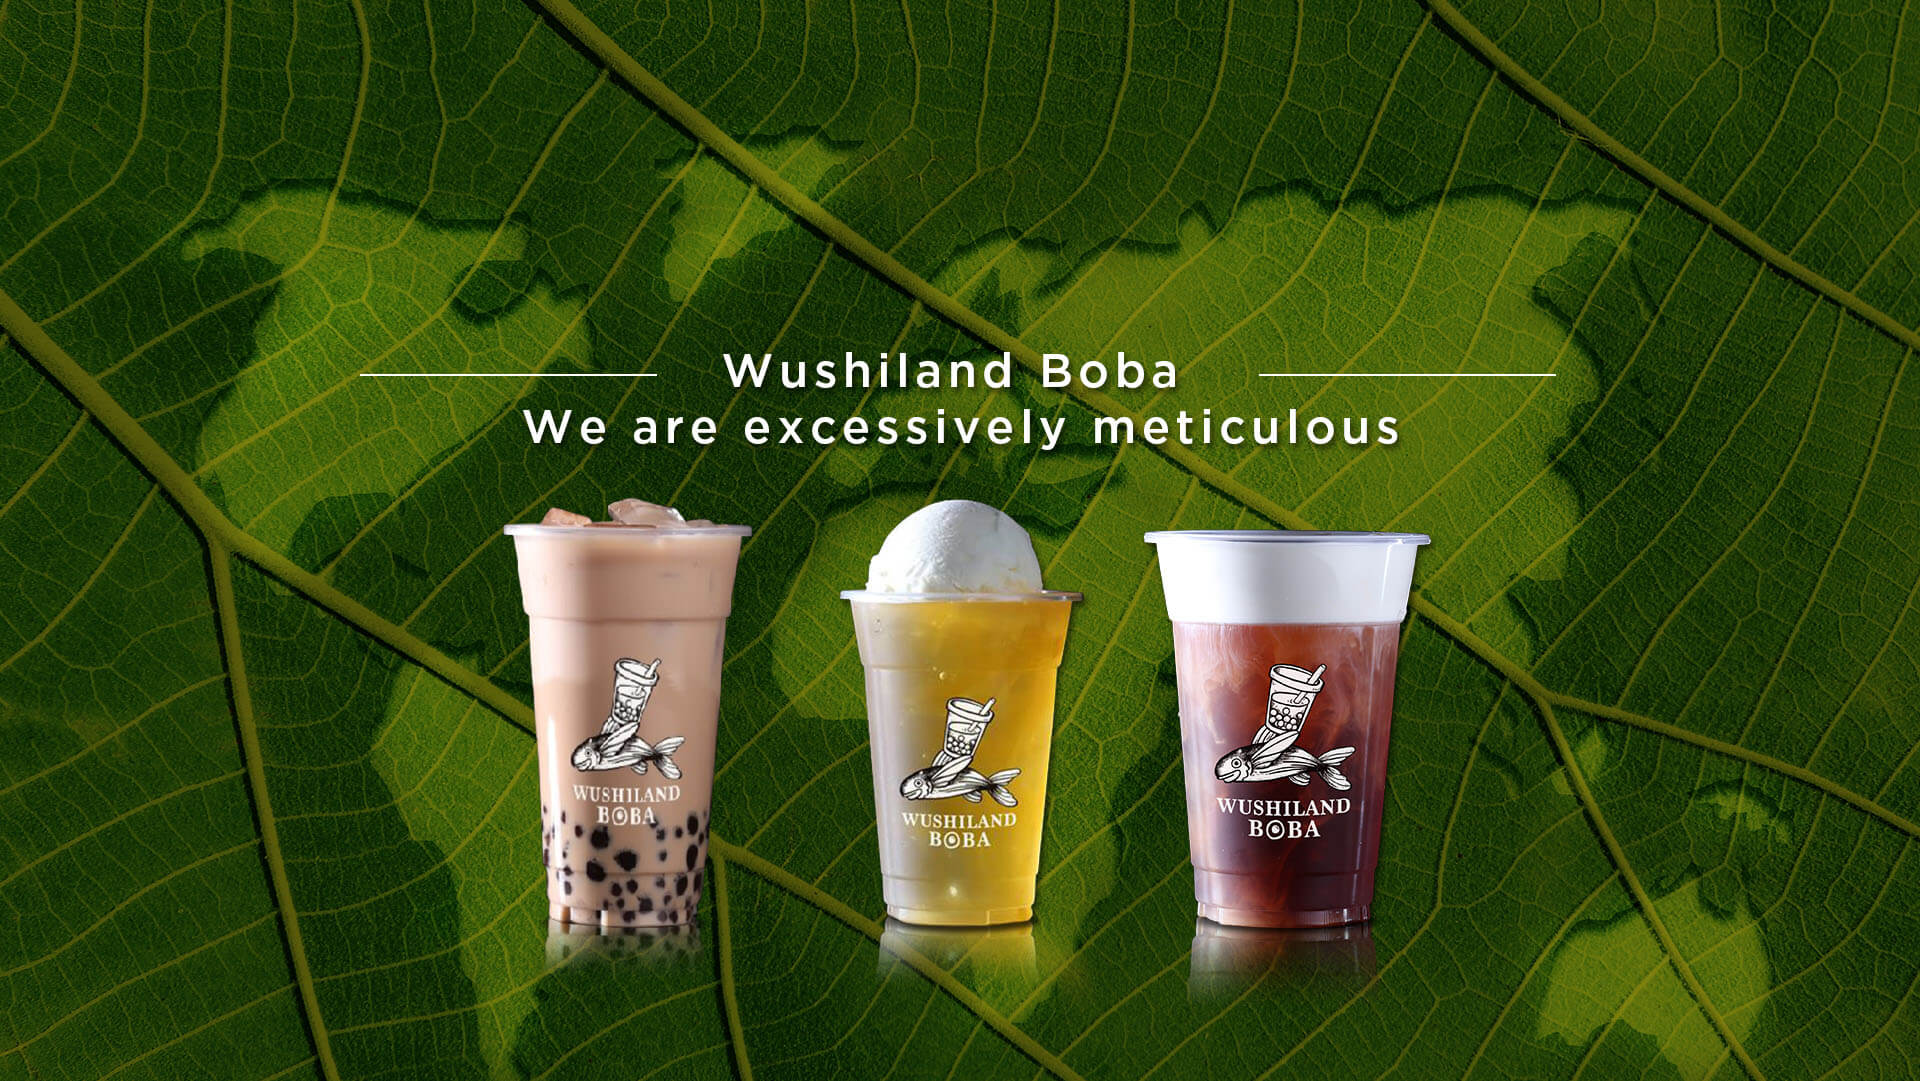 Wushiland Boba - We are excessively meticulous